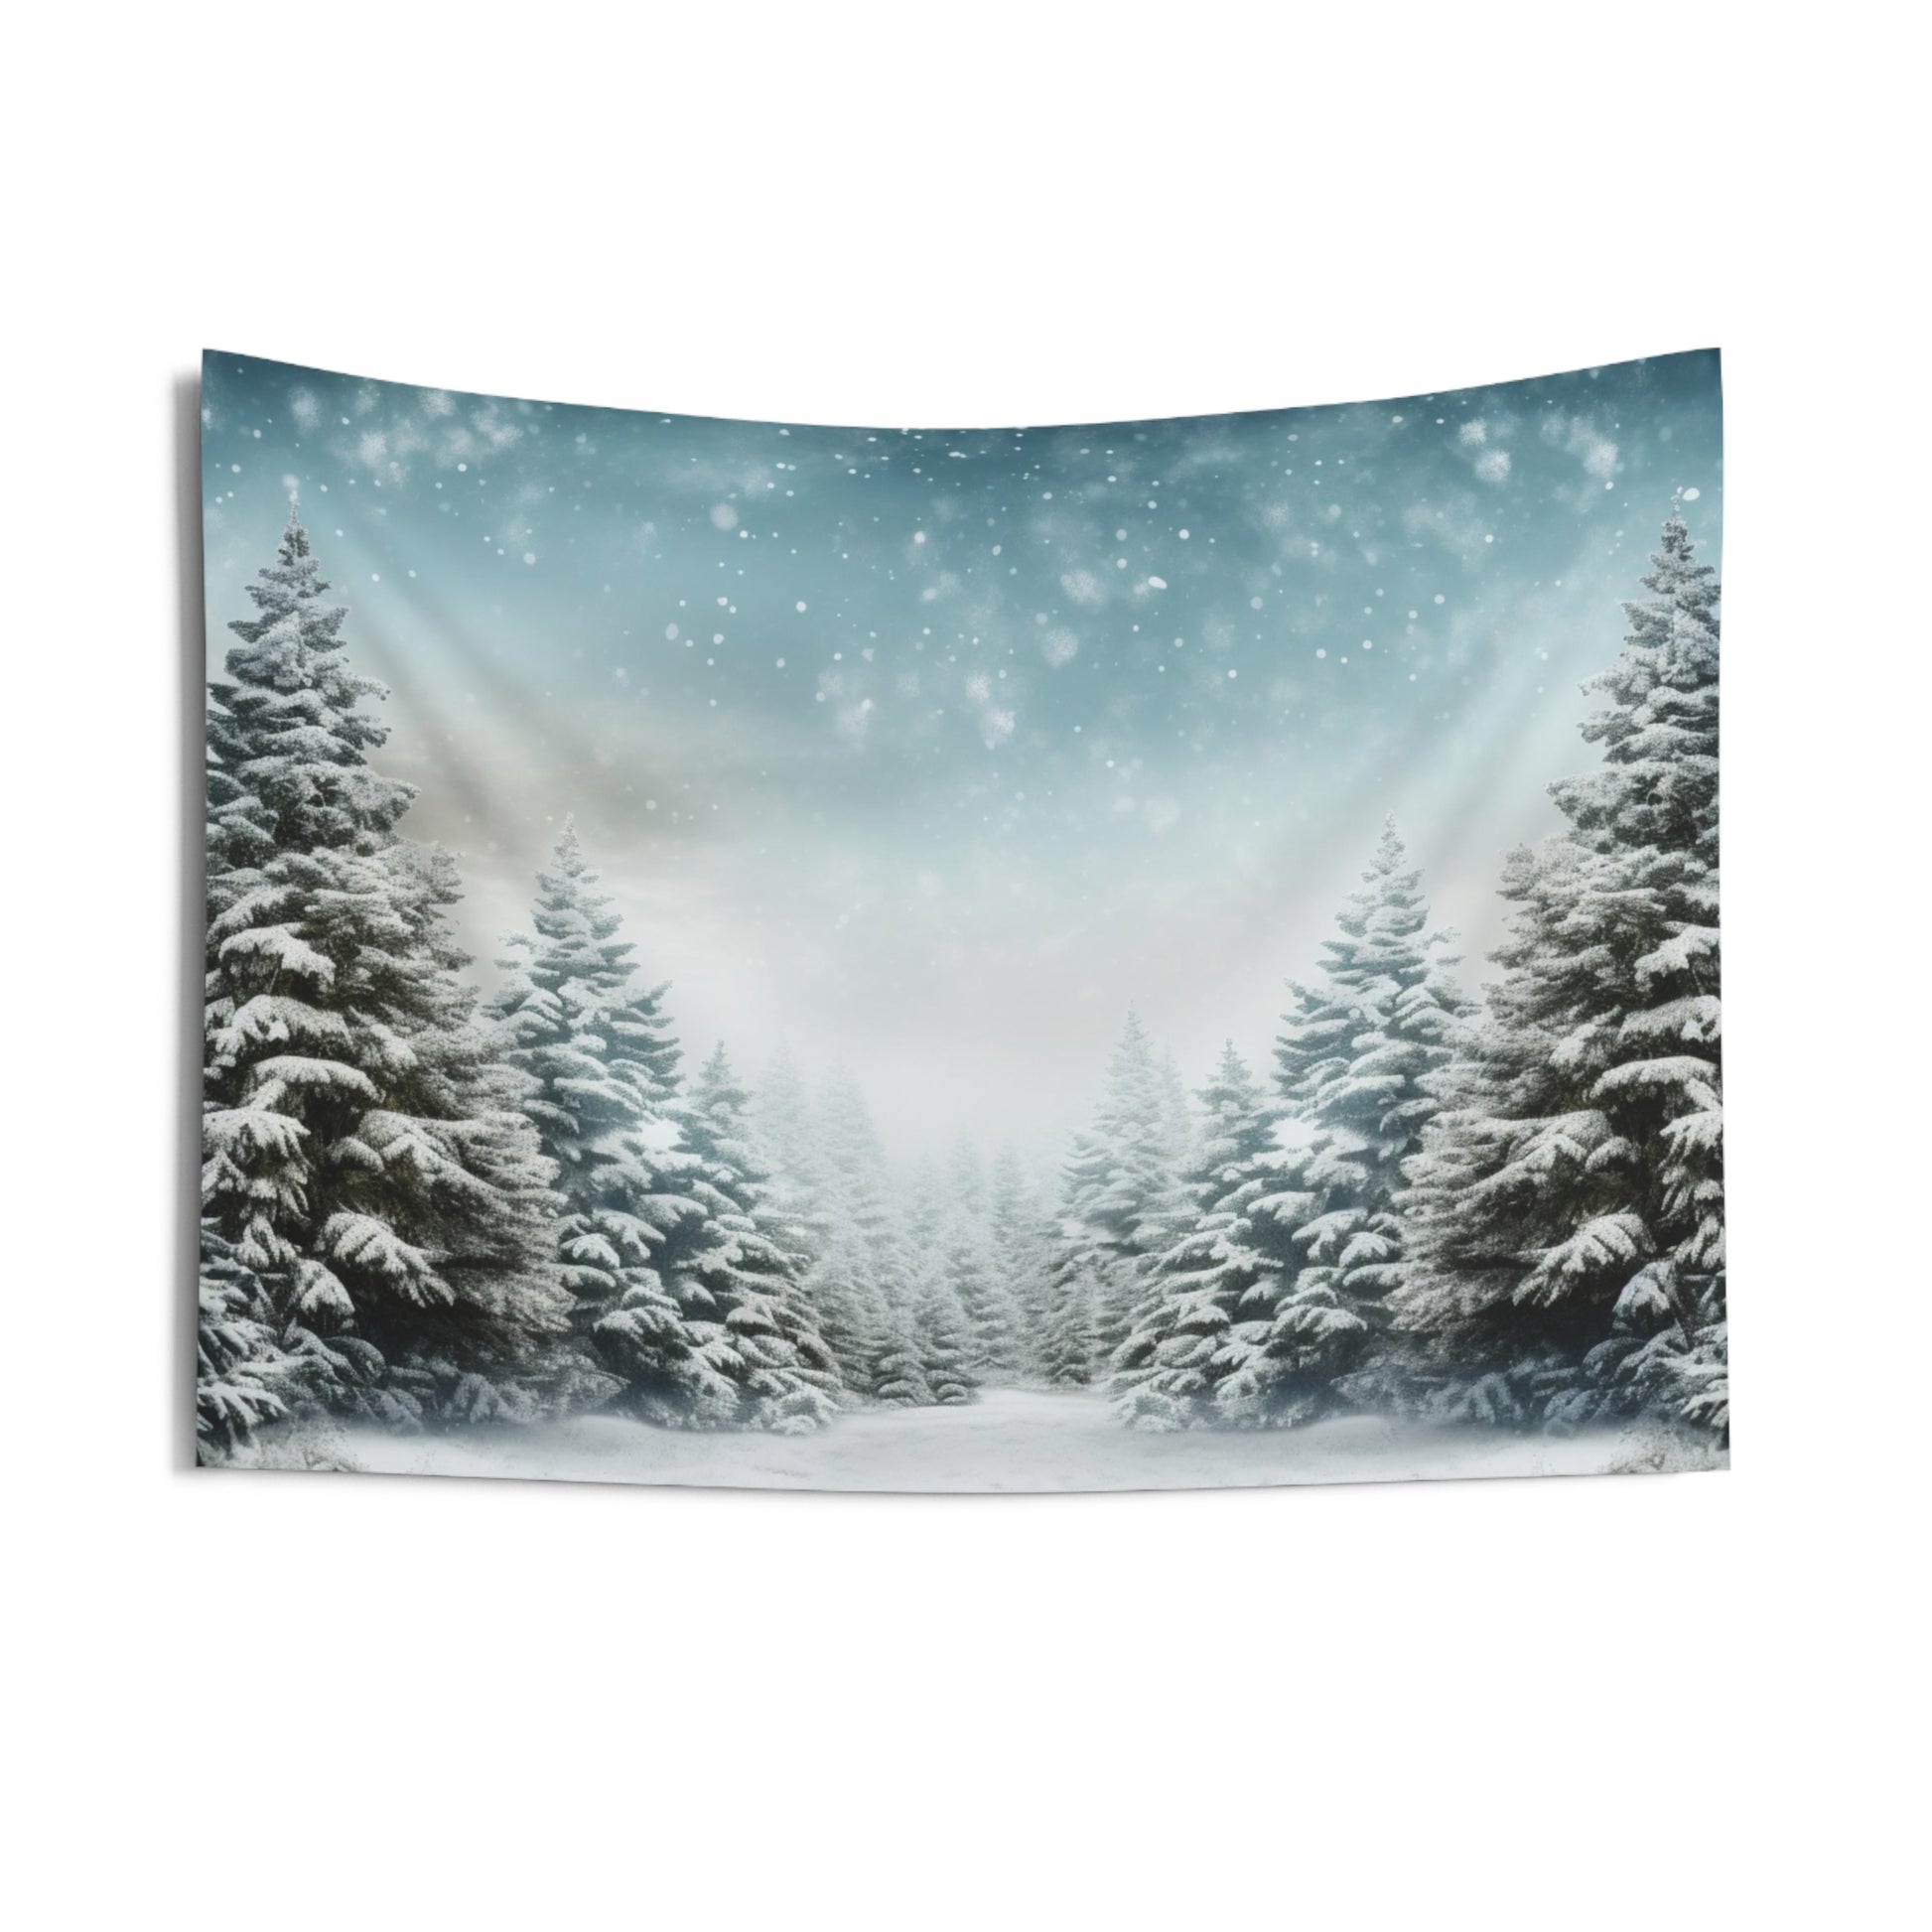 Winter Trees Tapestry, Pine Snowing Wall Art Hanging Cool Unique Landscape Aesthetic Large Small Decor Bedroom College Dorm Room Starcove Fashion